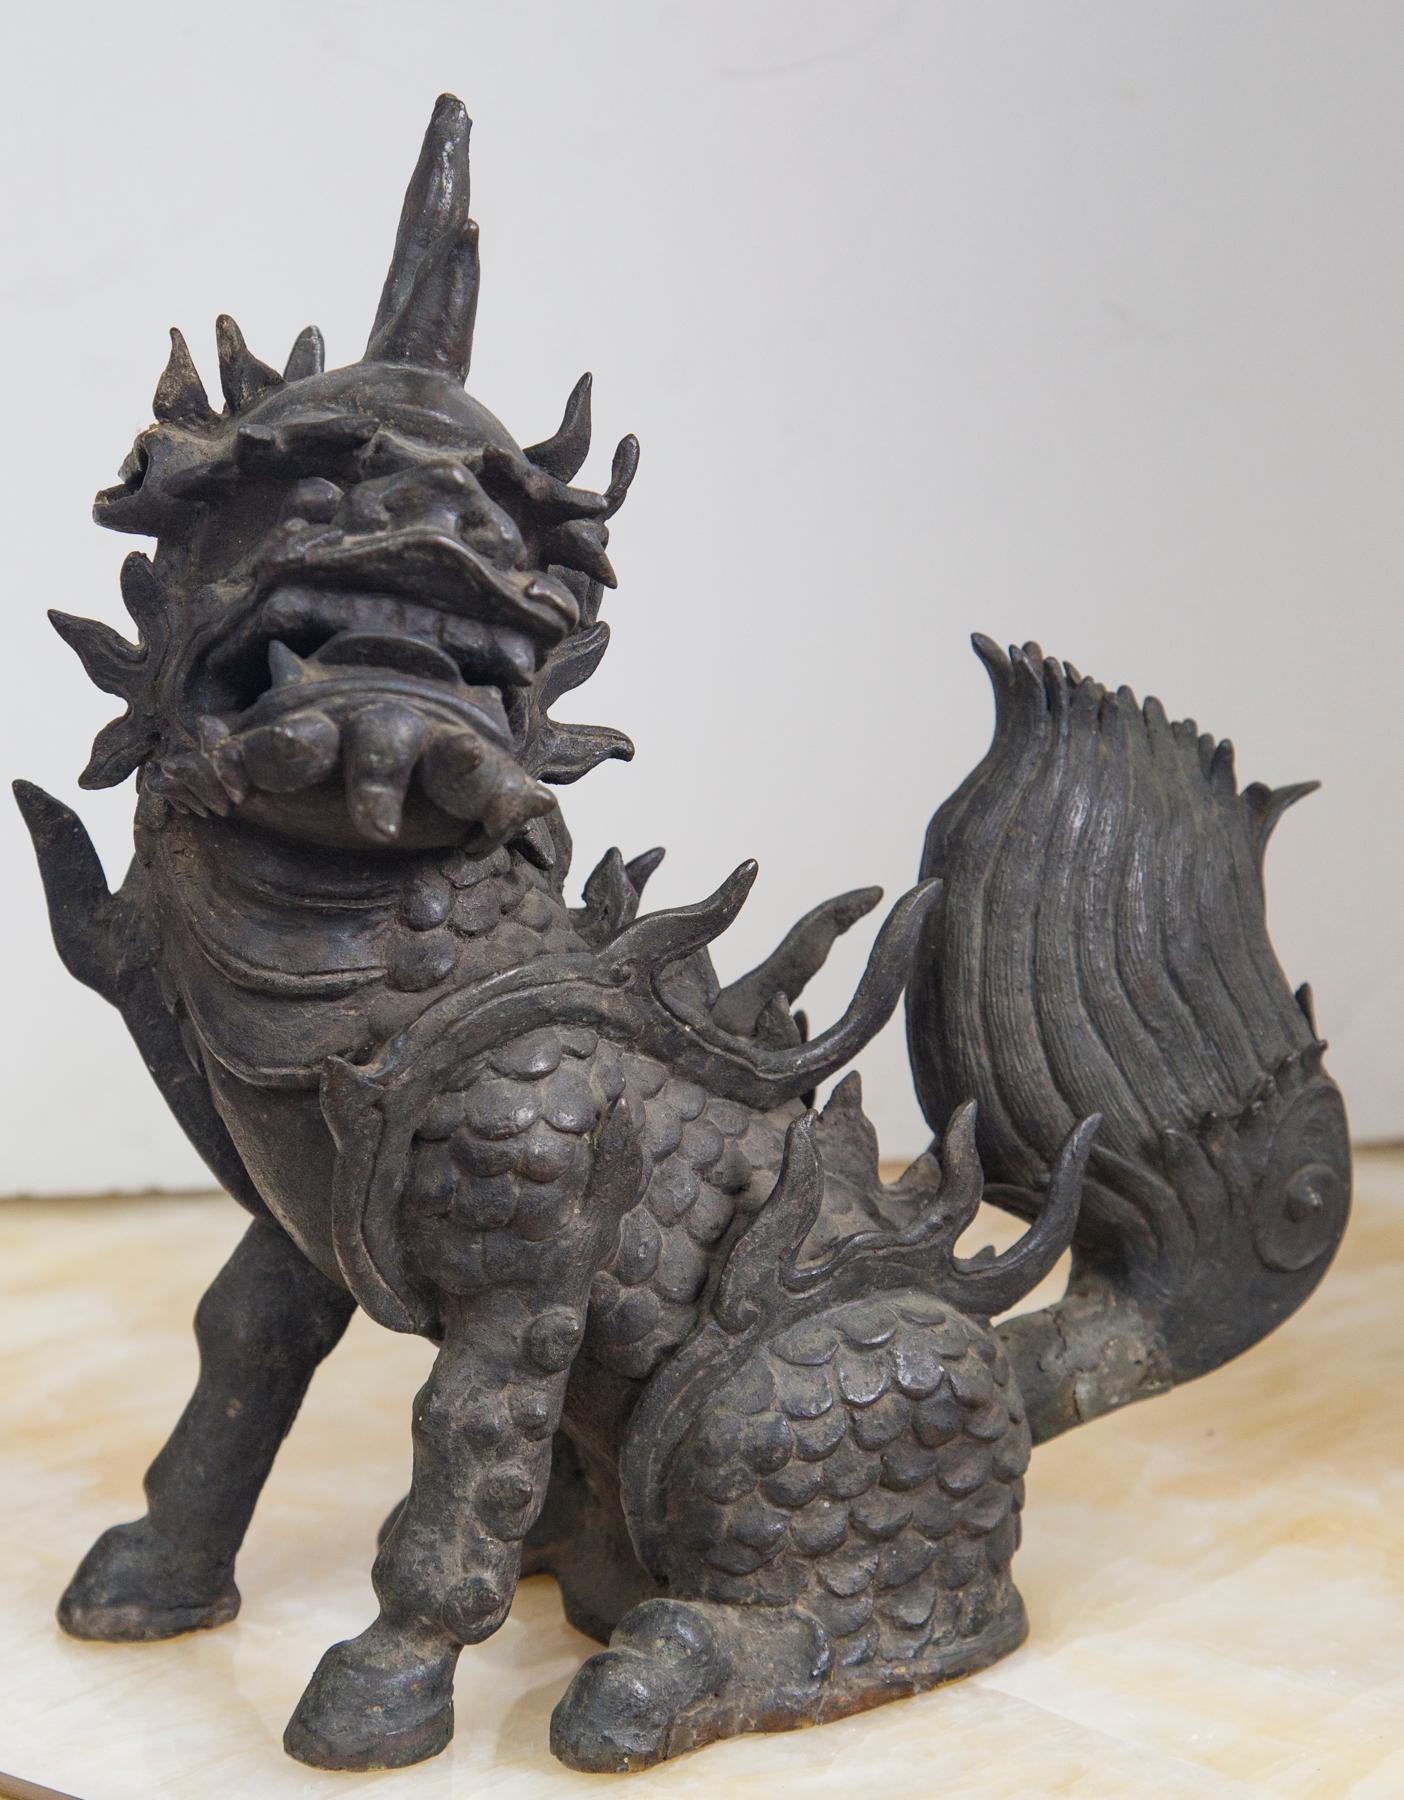 The mythological kylin in a setting position. Well crafted of bronze with many points, a large tail and scales over body.